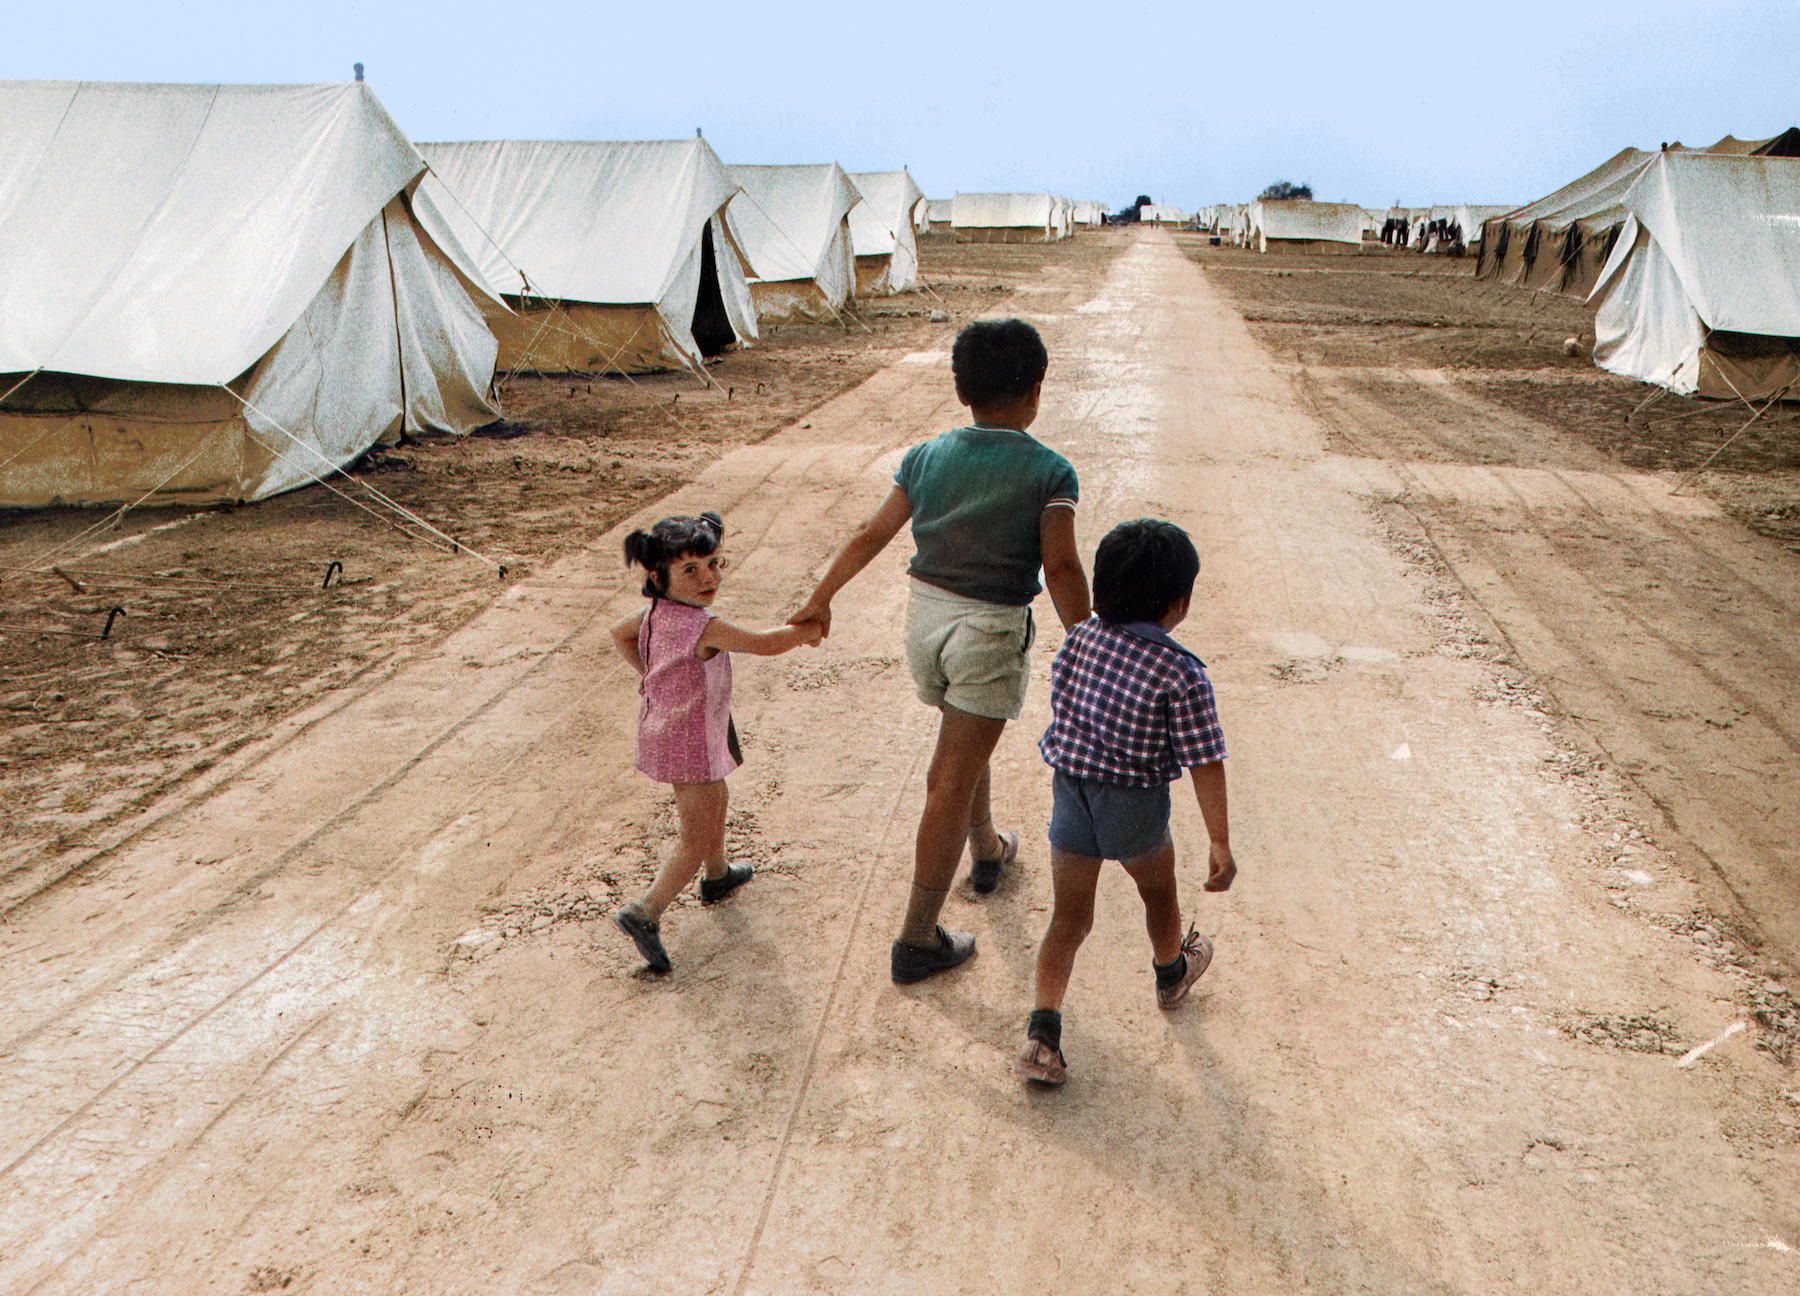 Greek Cypriot children in the Strovolos camp, 1974. Colorized picture